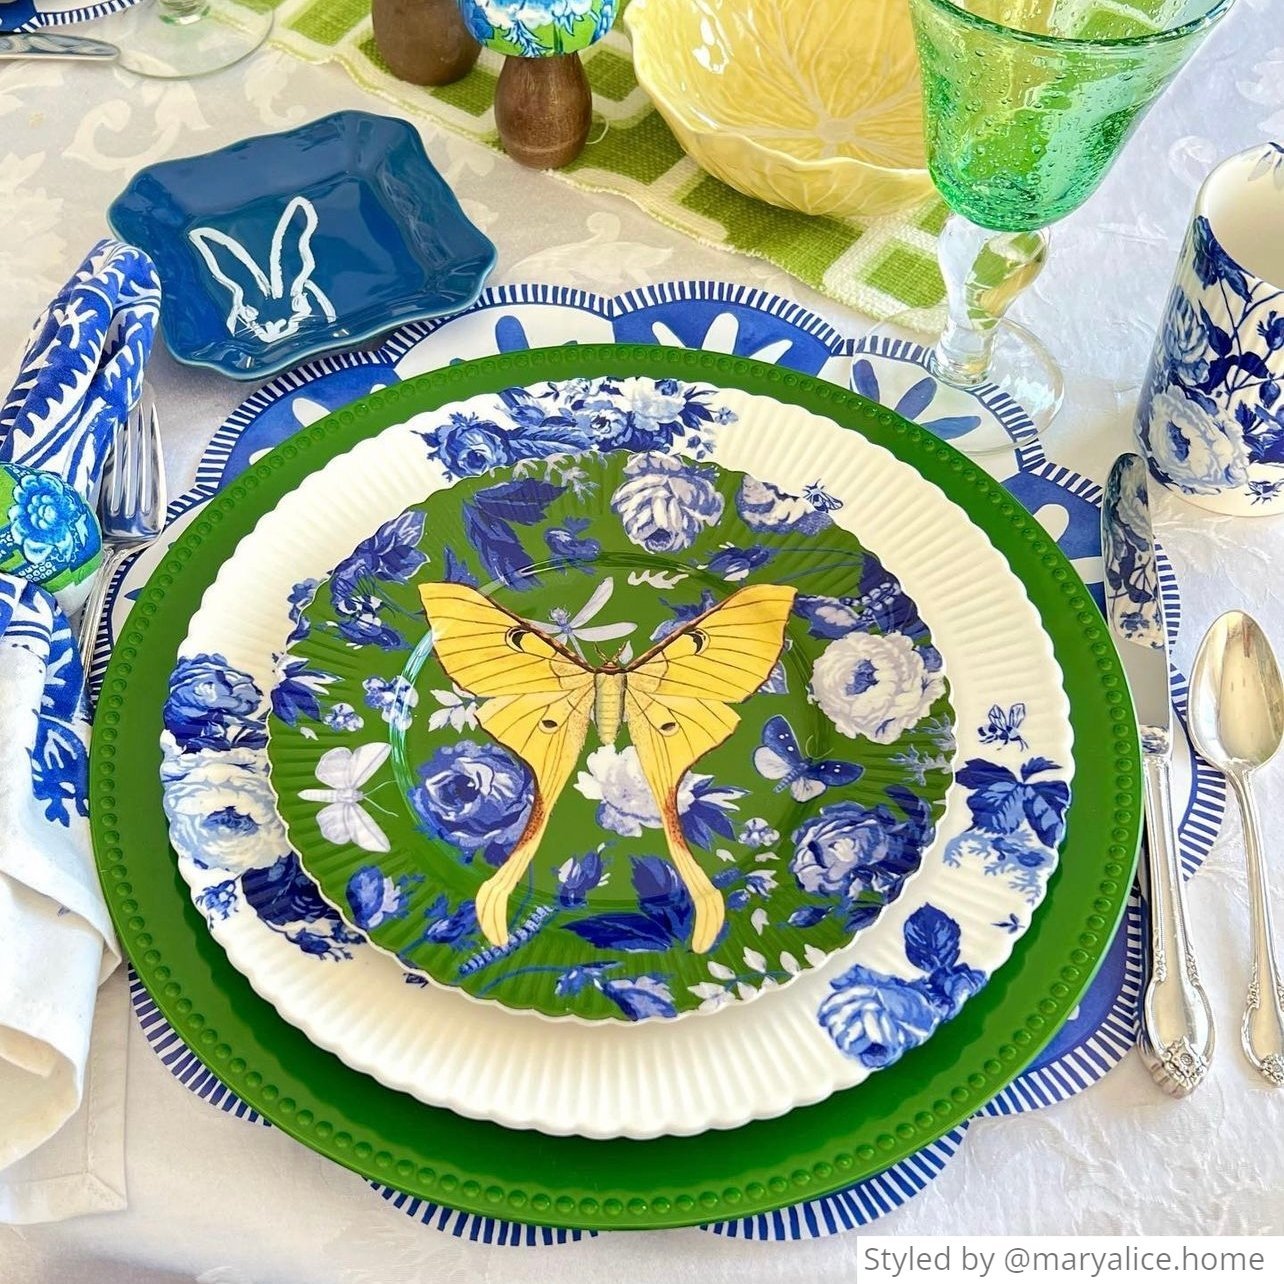 Place setting with a blue and white scalloped round paper placemat layered with green and white dishes with a yellow butterfly